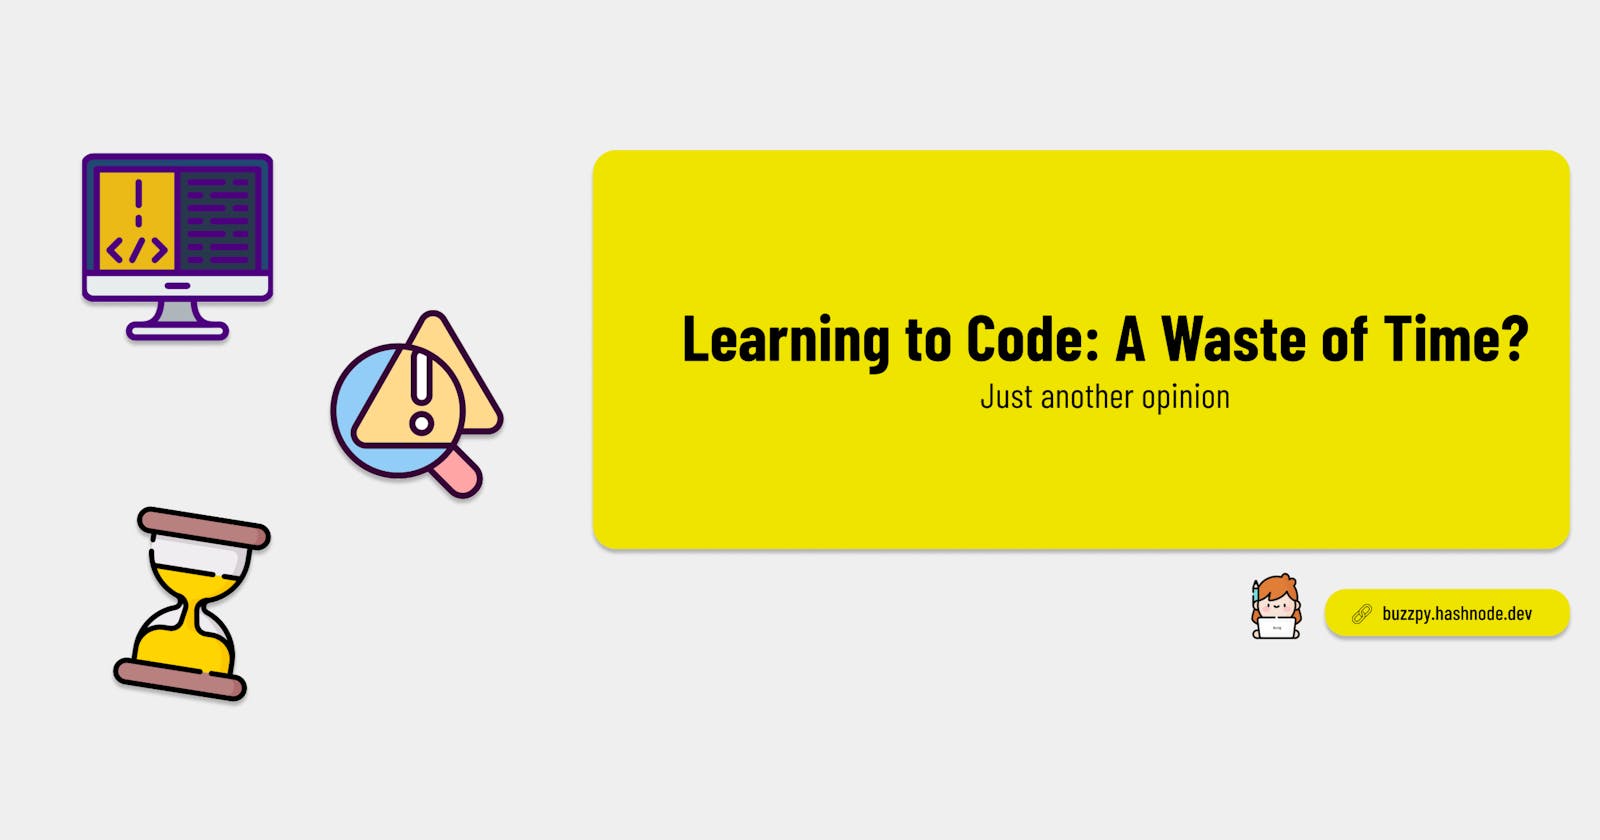 Learning to Code: A Waste of Time?